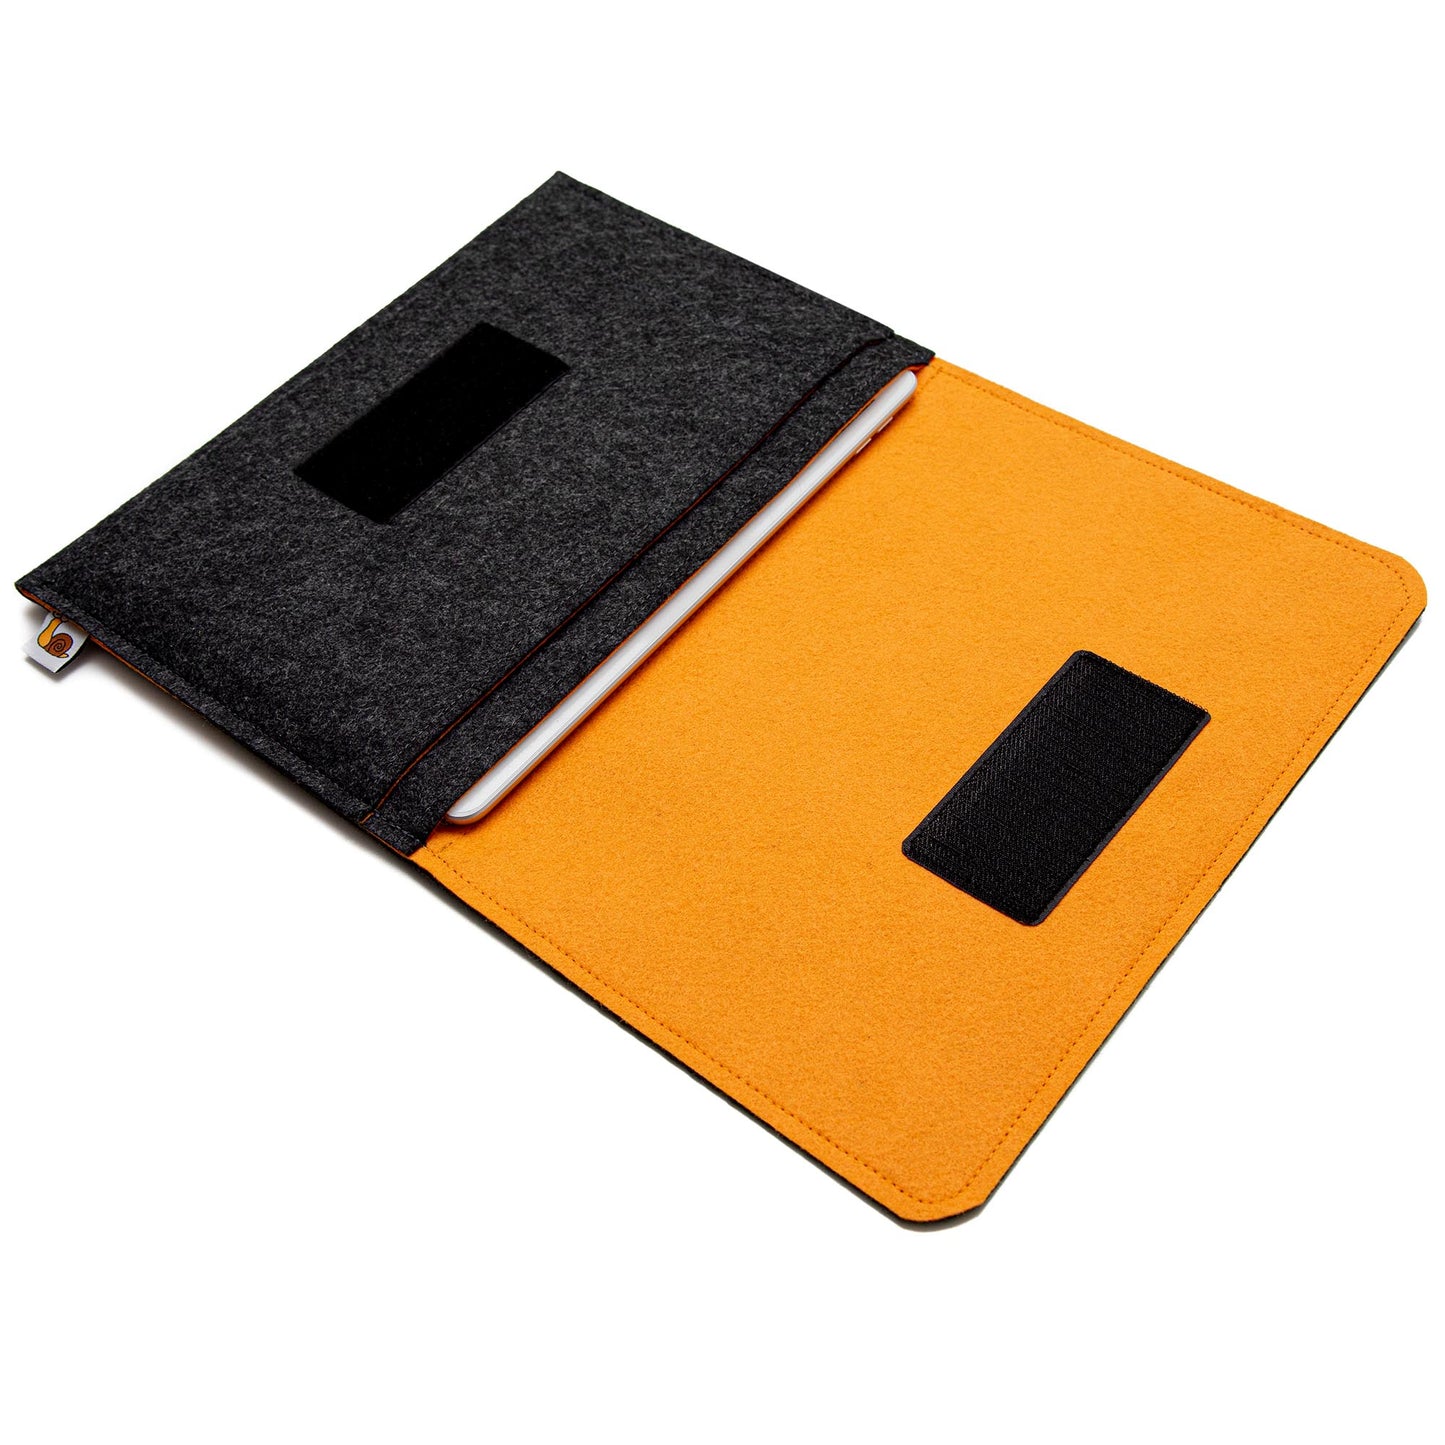 Premium Felt iPad Cover: Ultimate Protection with Accessories Pocket - Charcoal & Light Orange